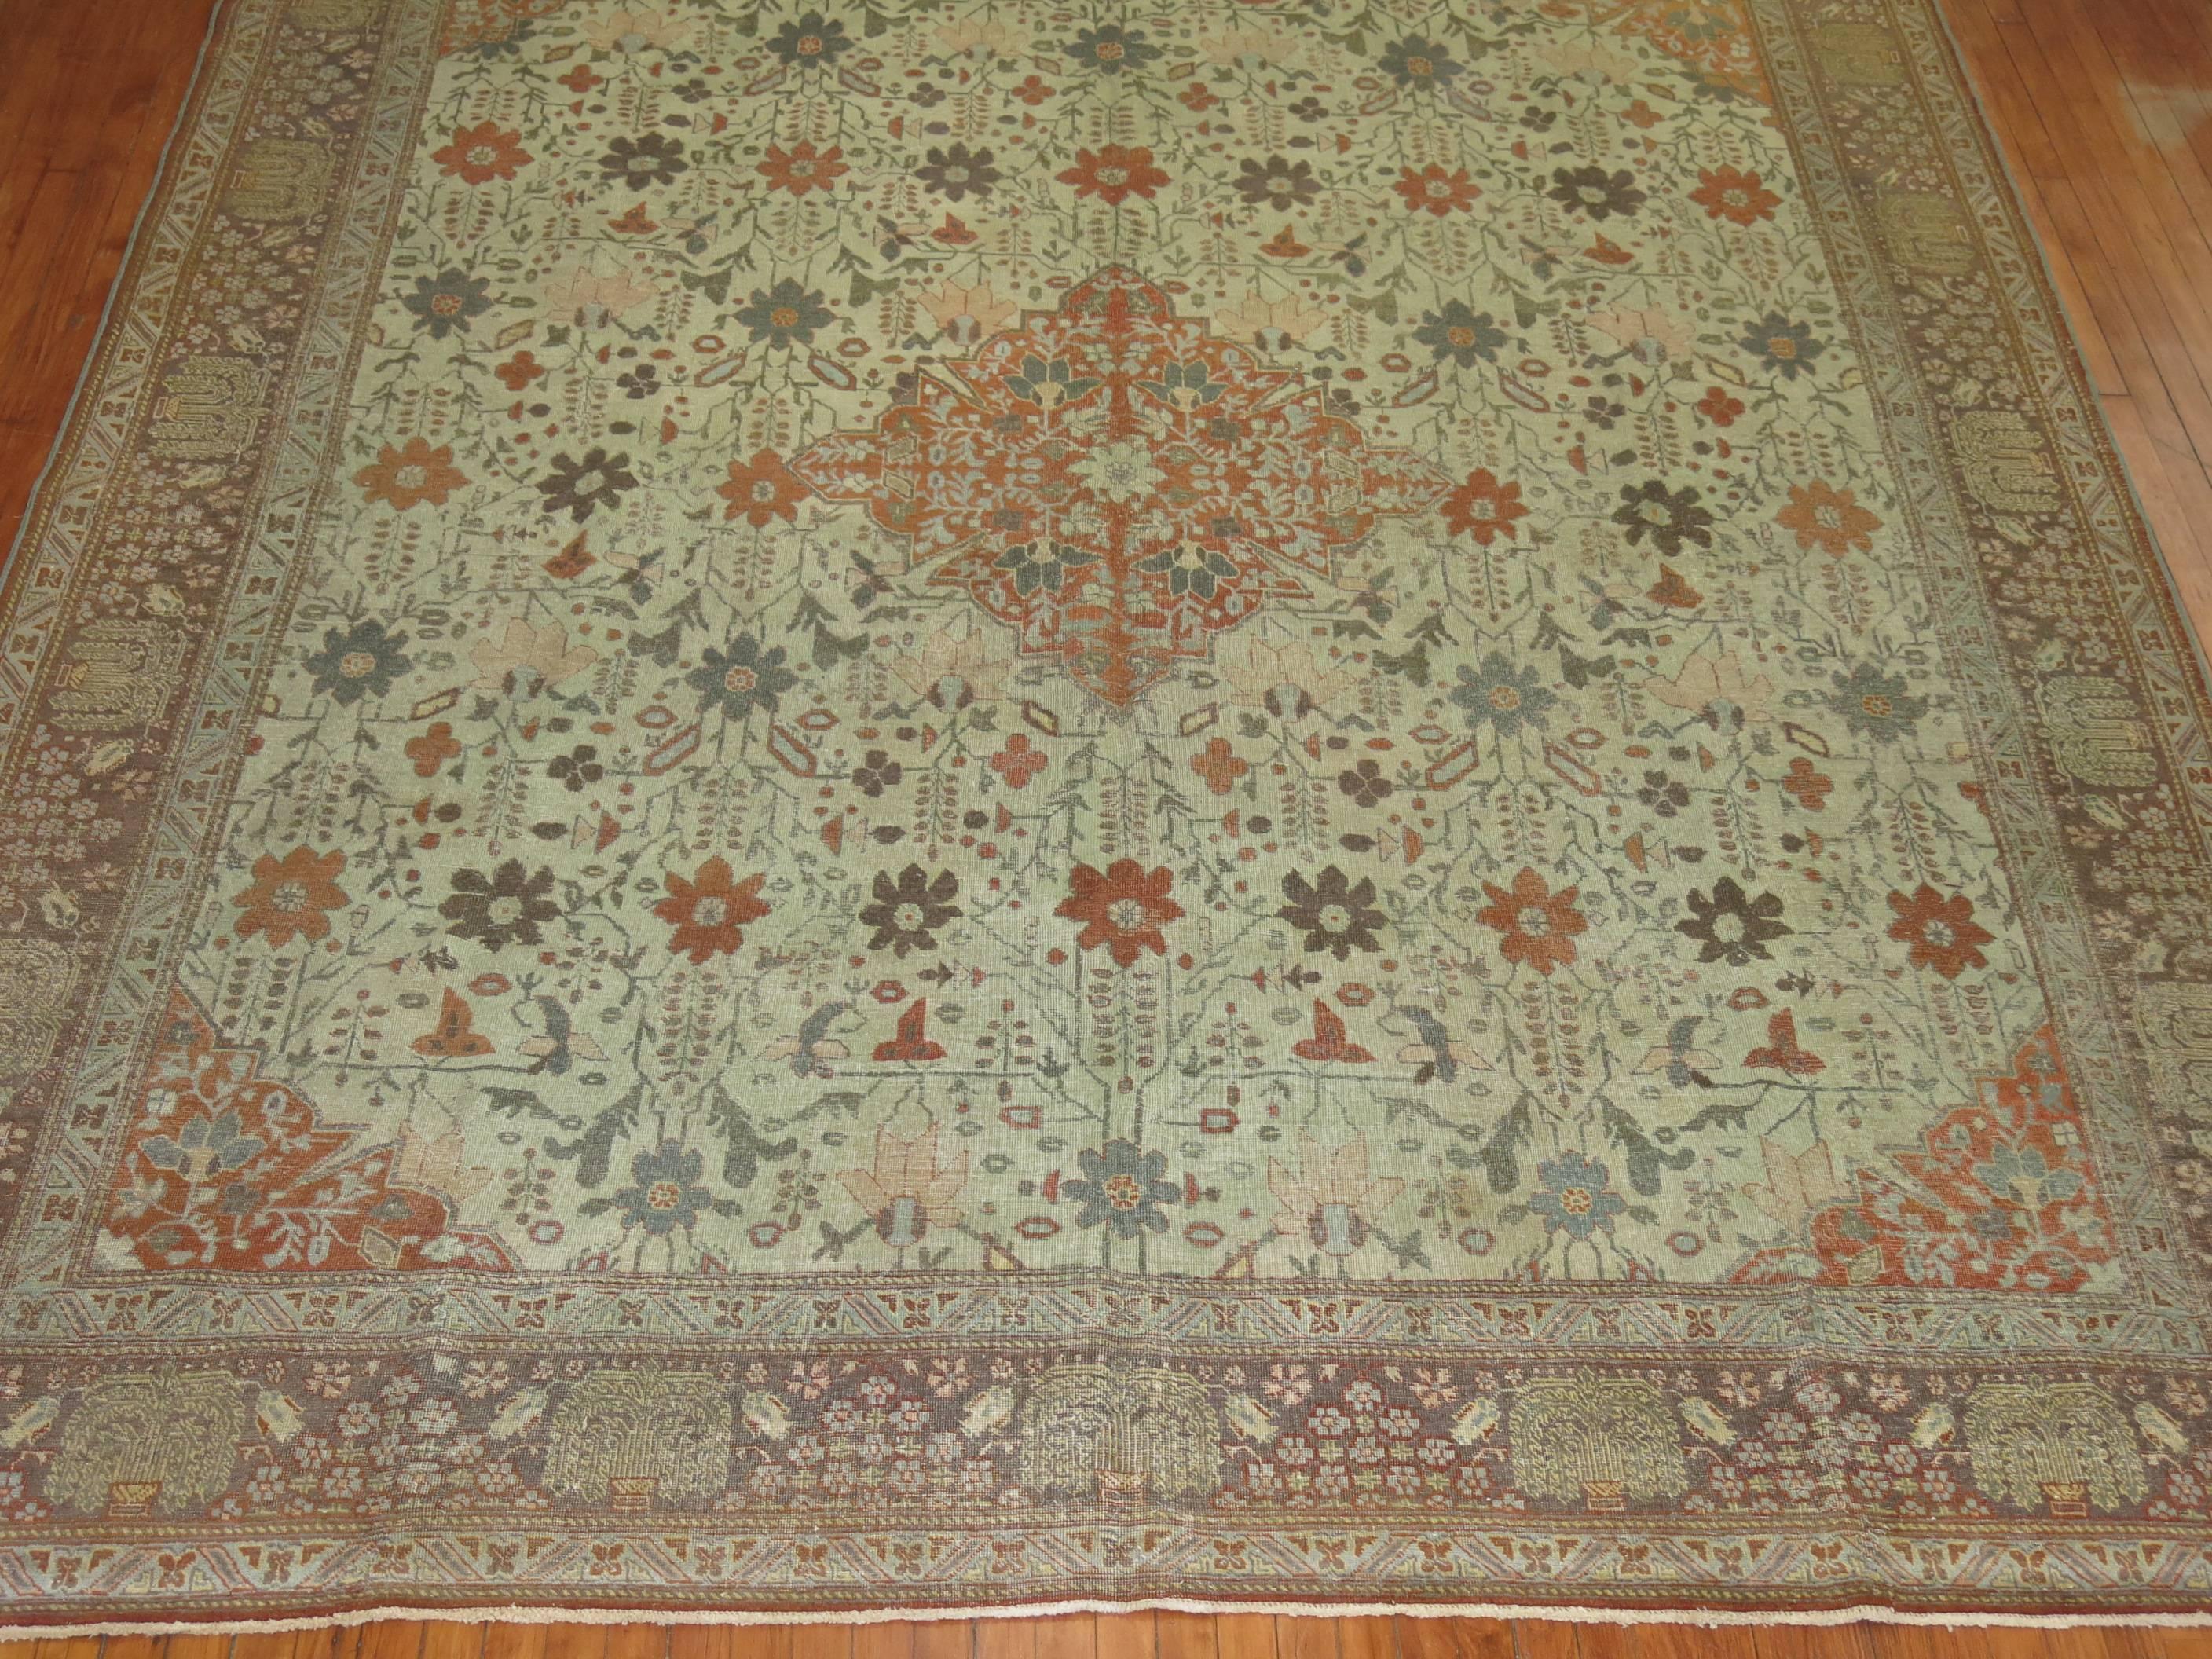 An early 20th century Persian Tabriz rug in earth tones with an autumn-like motif.